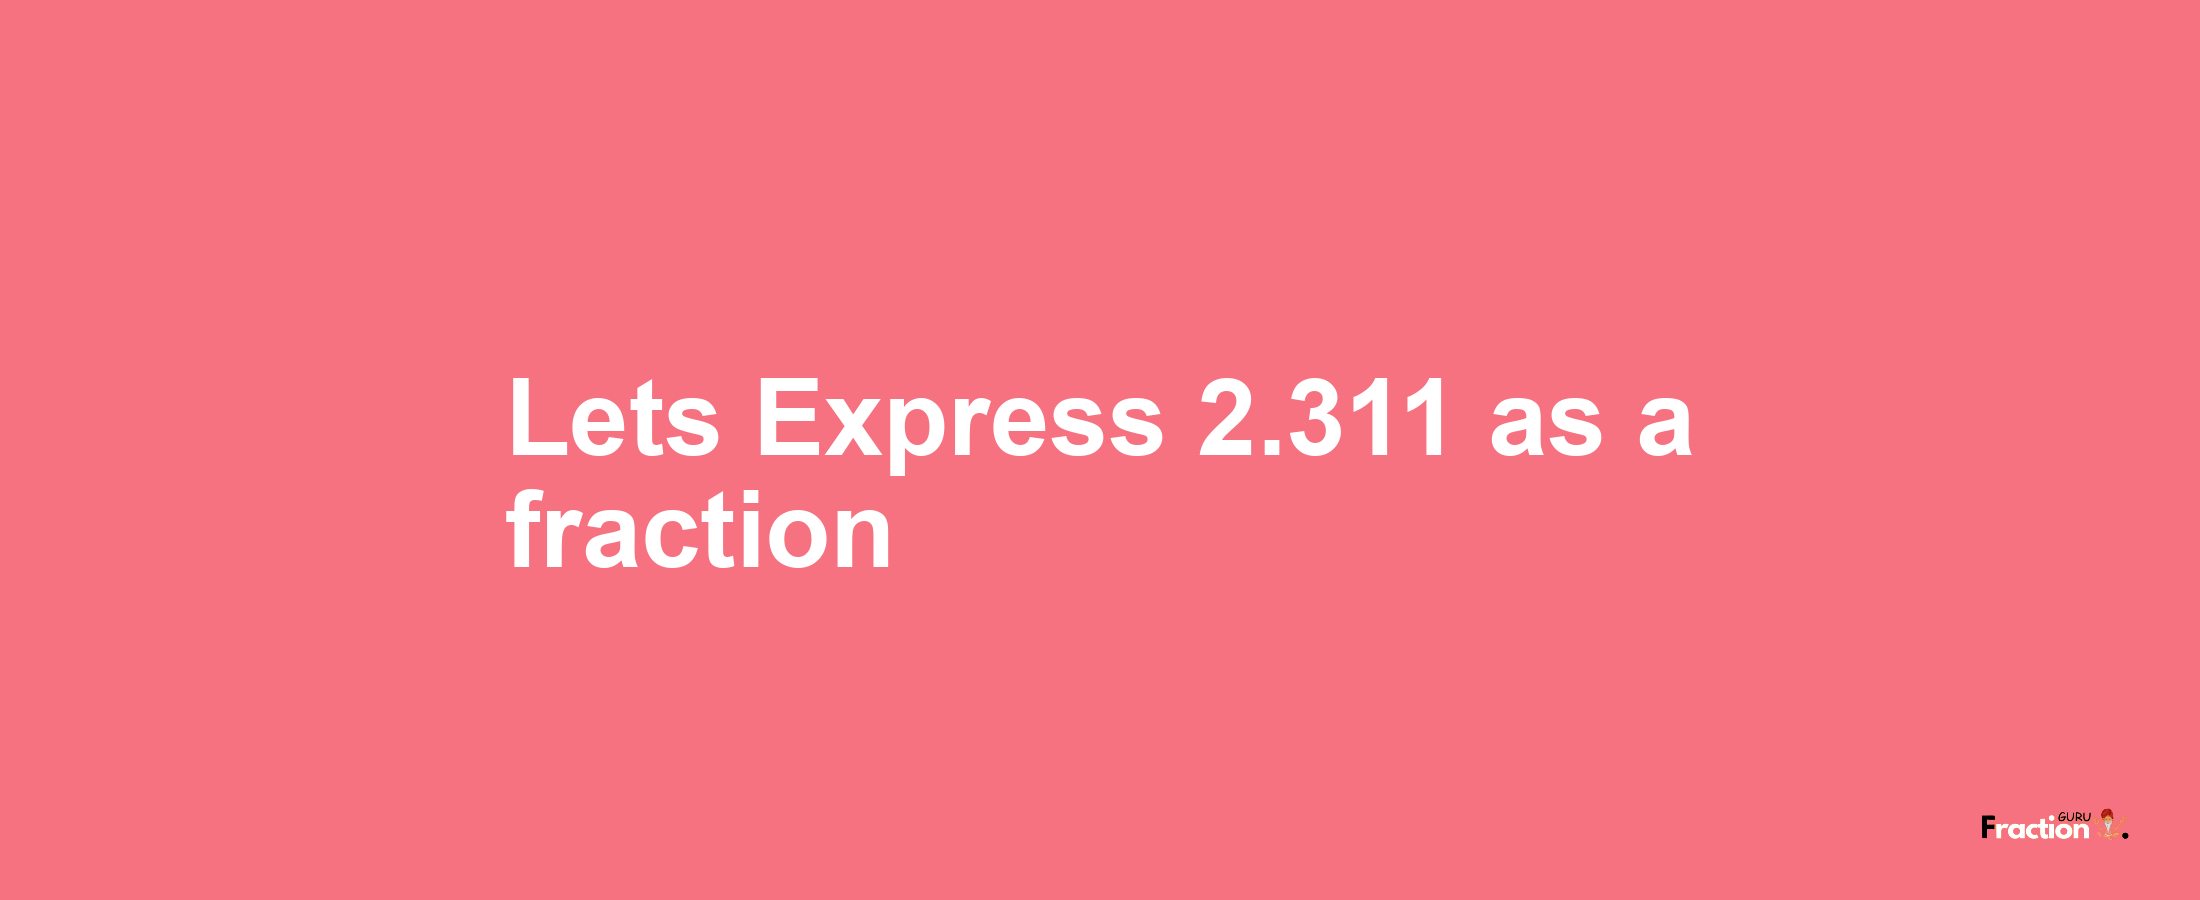 Lets Express 2.311 as afraction